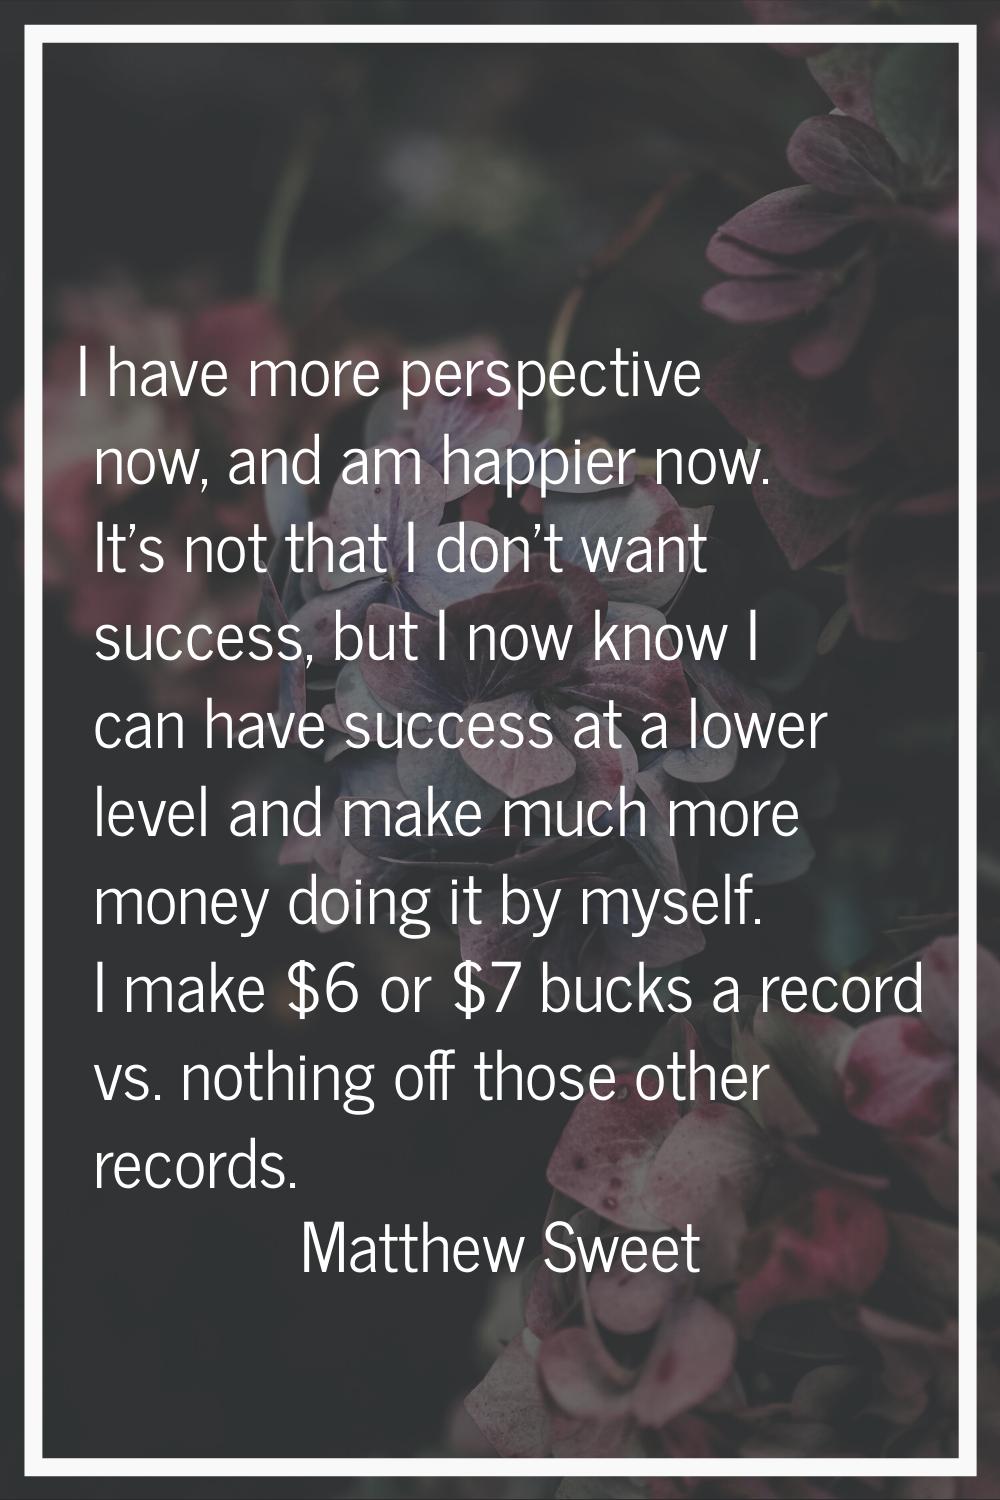 I have more perspective now, and am happier now. It's not that I don't want success, but I now know